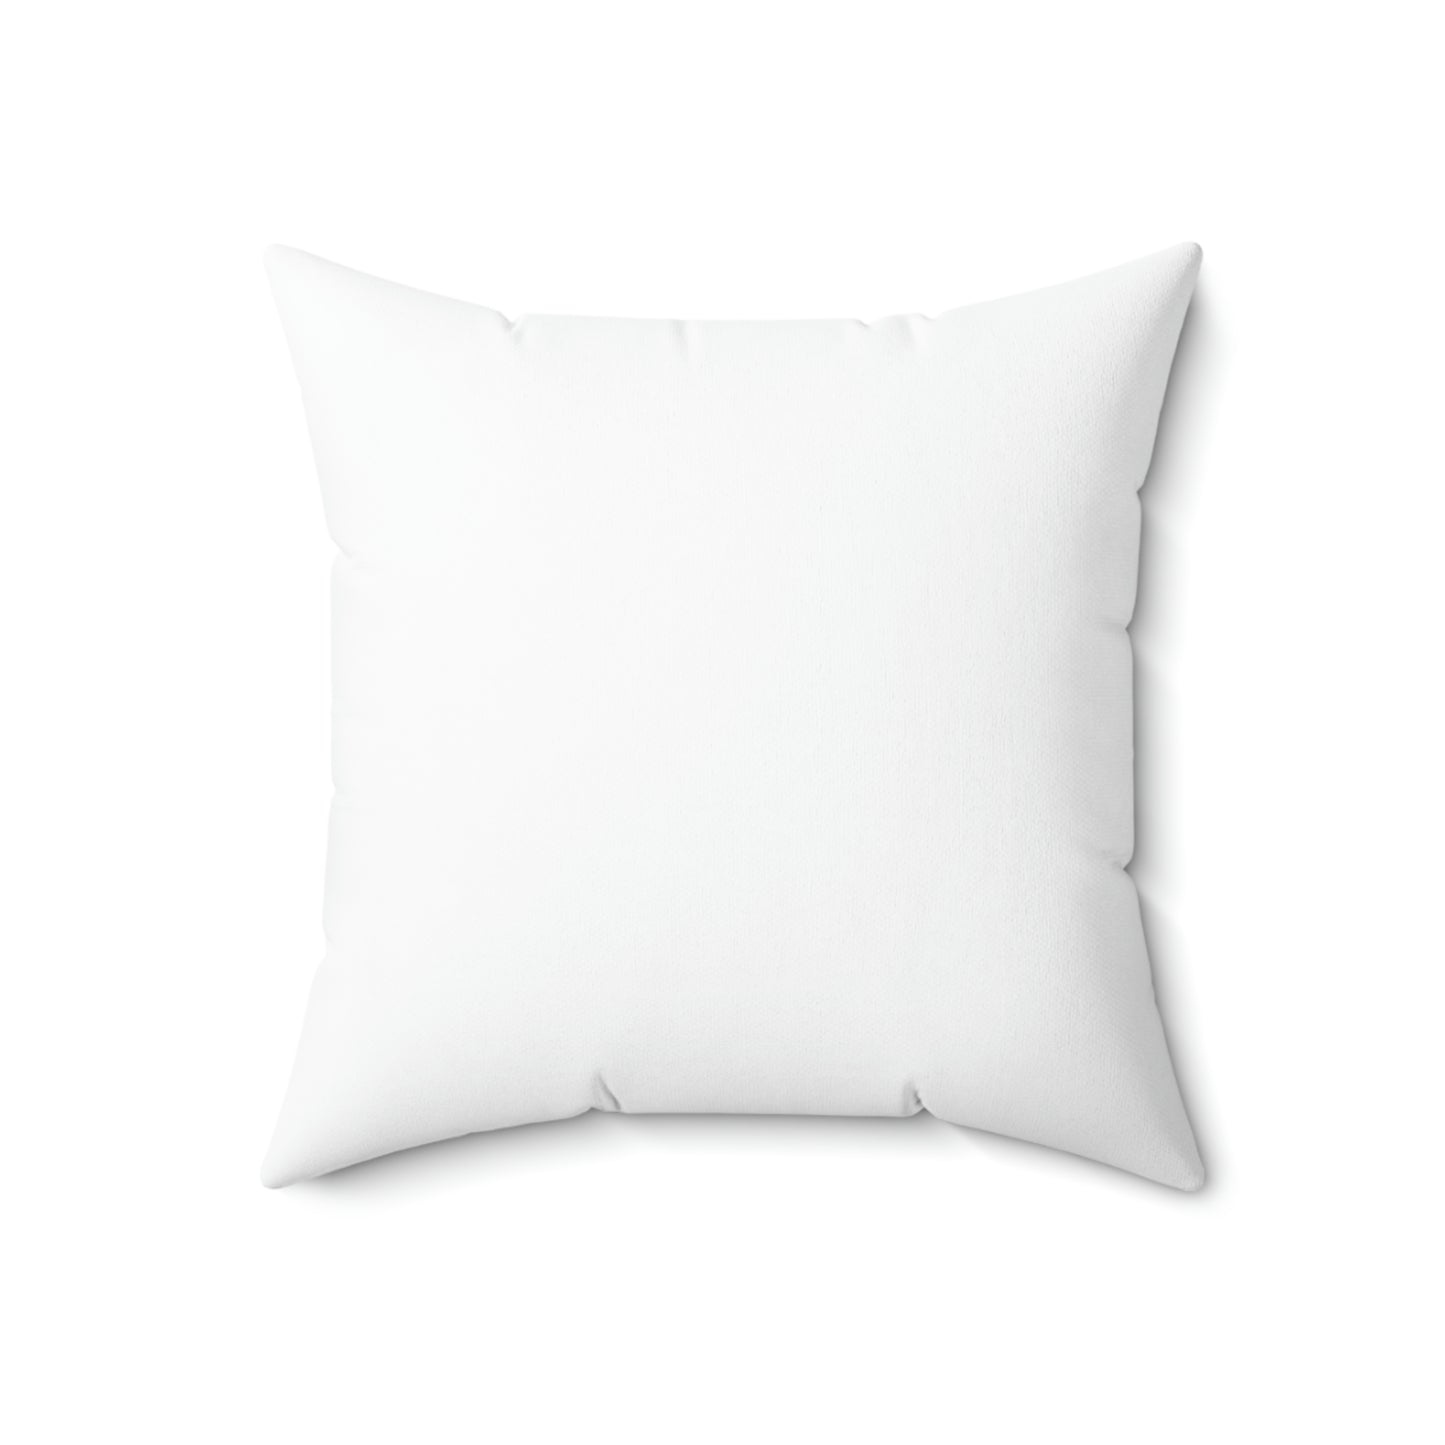 Spun Polyester Square Pillow Case ”Roof on White”